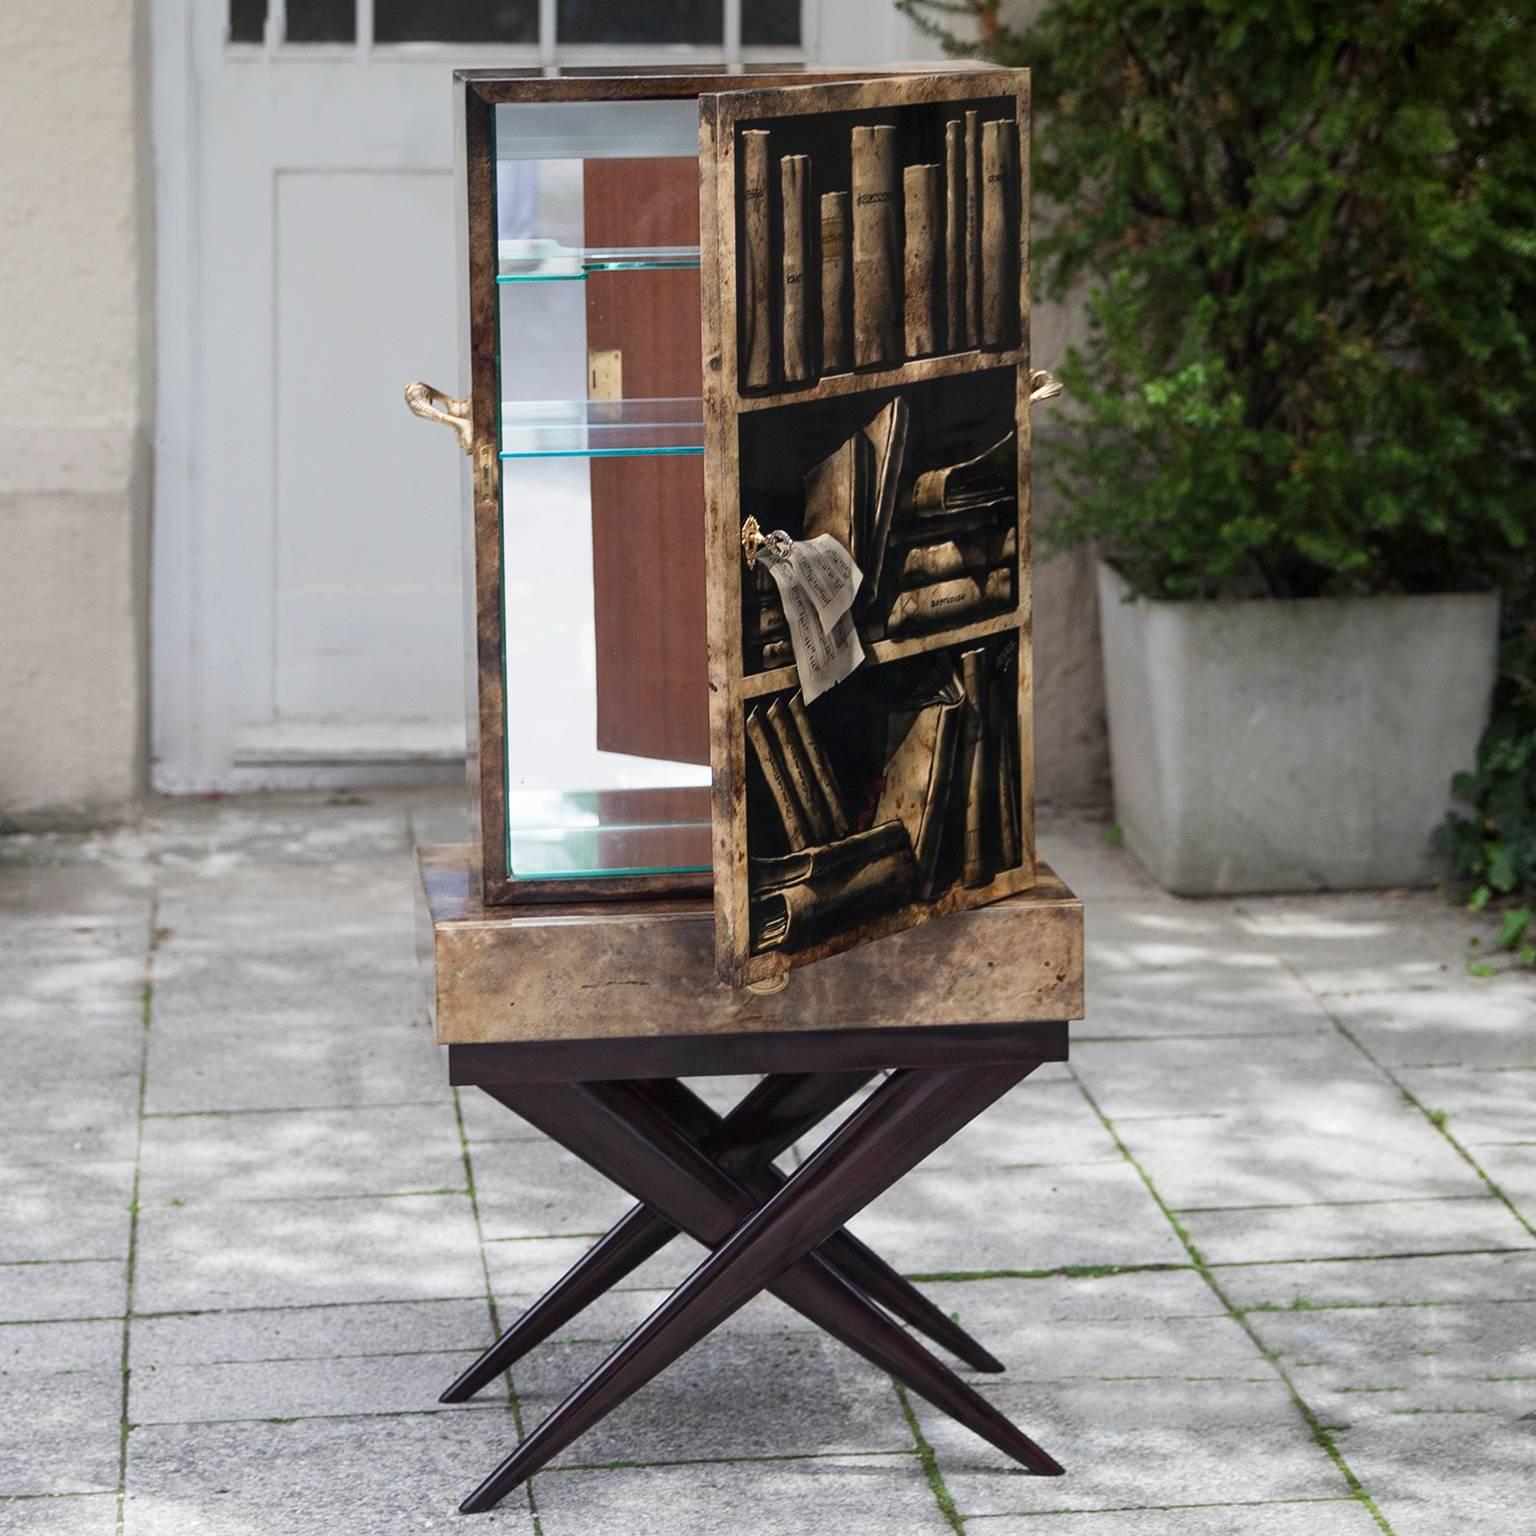 Wonderful sculptural bar cabinet made by Aldo Tura in the 1960s. The Trompe l'oeil painted goatskin surface seems in a three-dimensional book shelf based on a tanned pearwood x base. Mirrored inside and fitted with an interior light.
Dimensions: 122